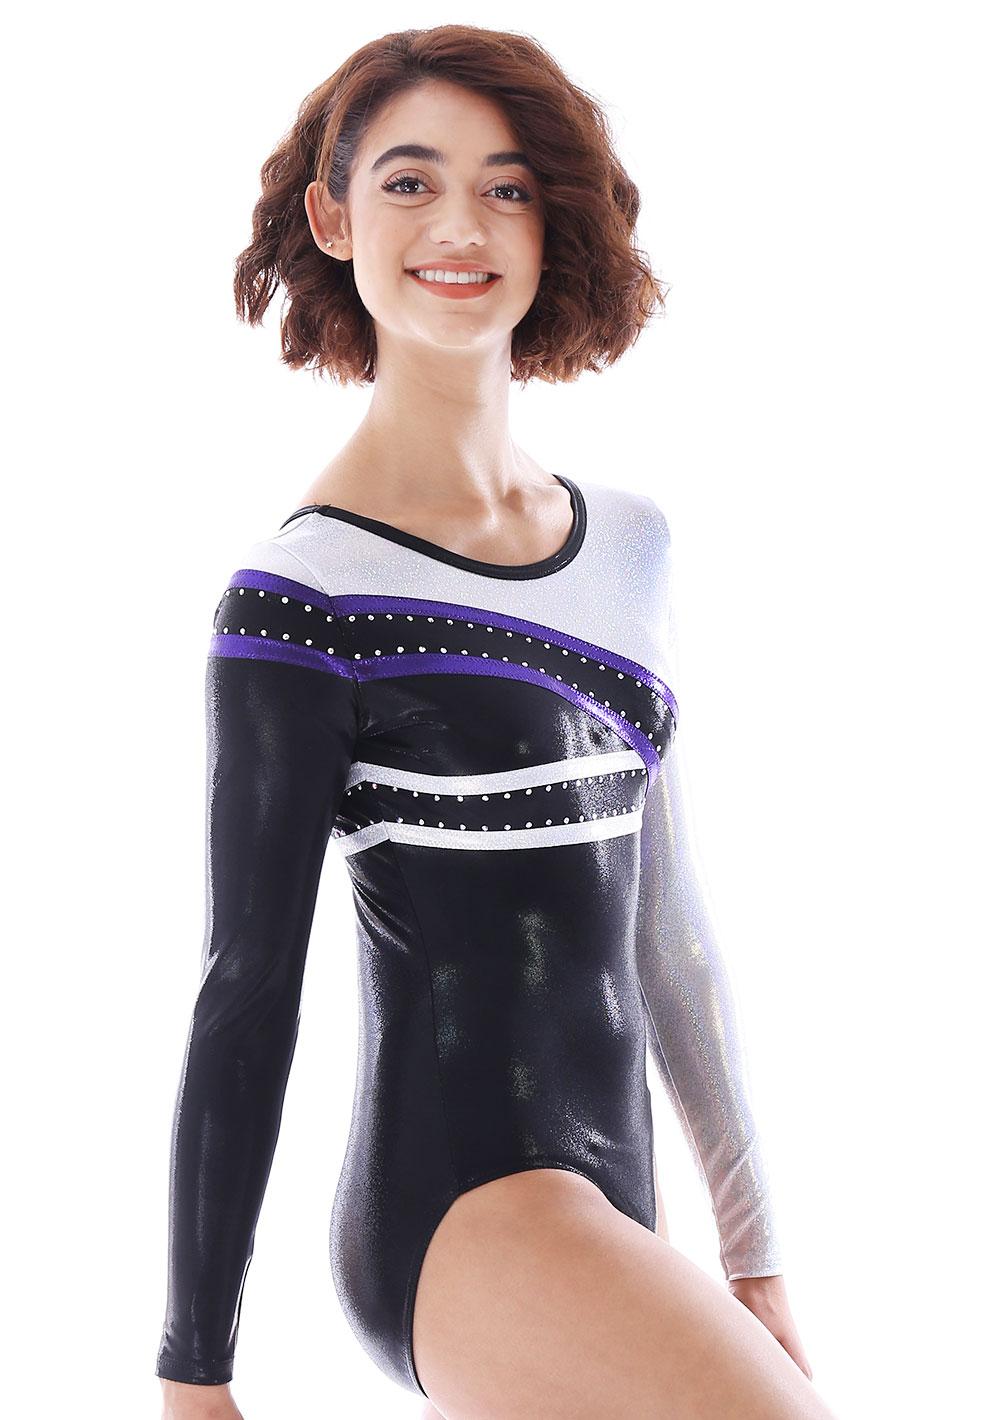 KENNEDY - K513: - Ladies Long sleeve leotard in Black and Silver with ...